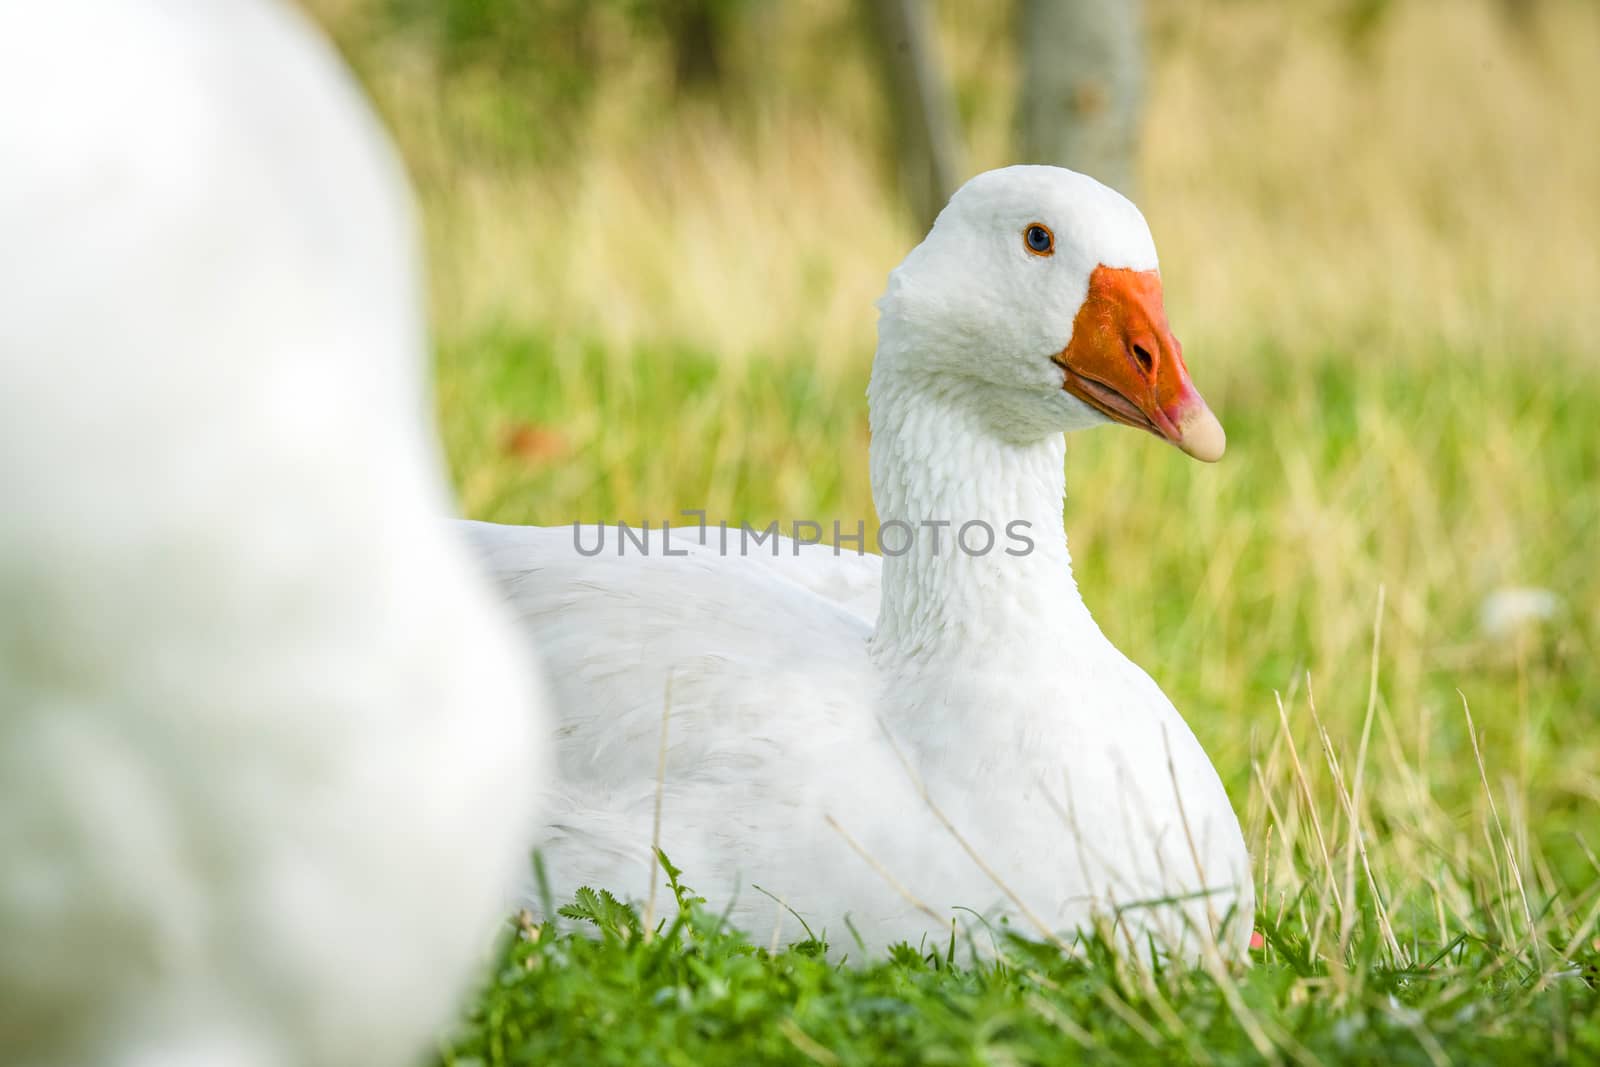 Geese relaxing in green grass in the spring by Sportactive